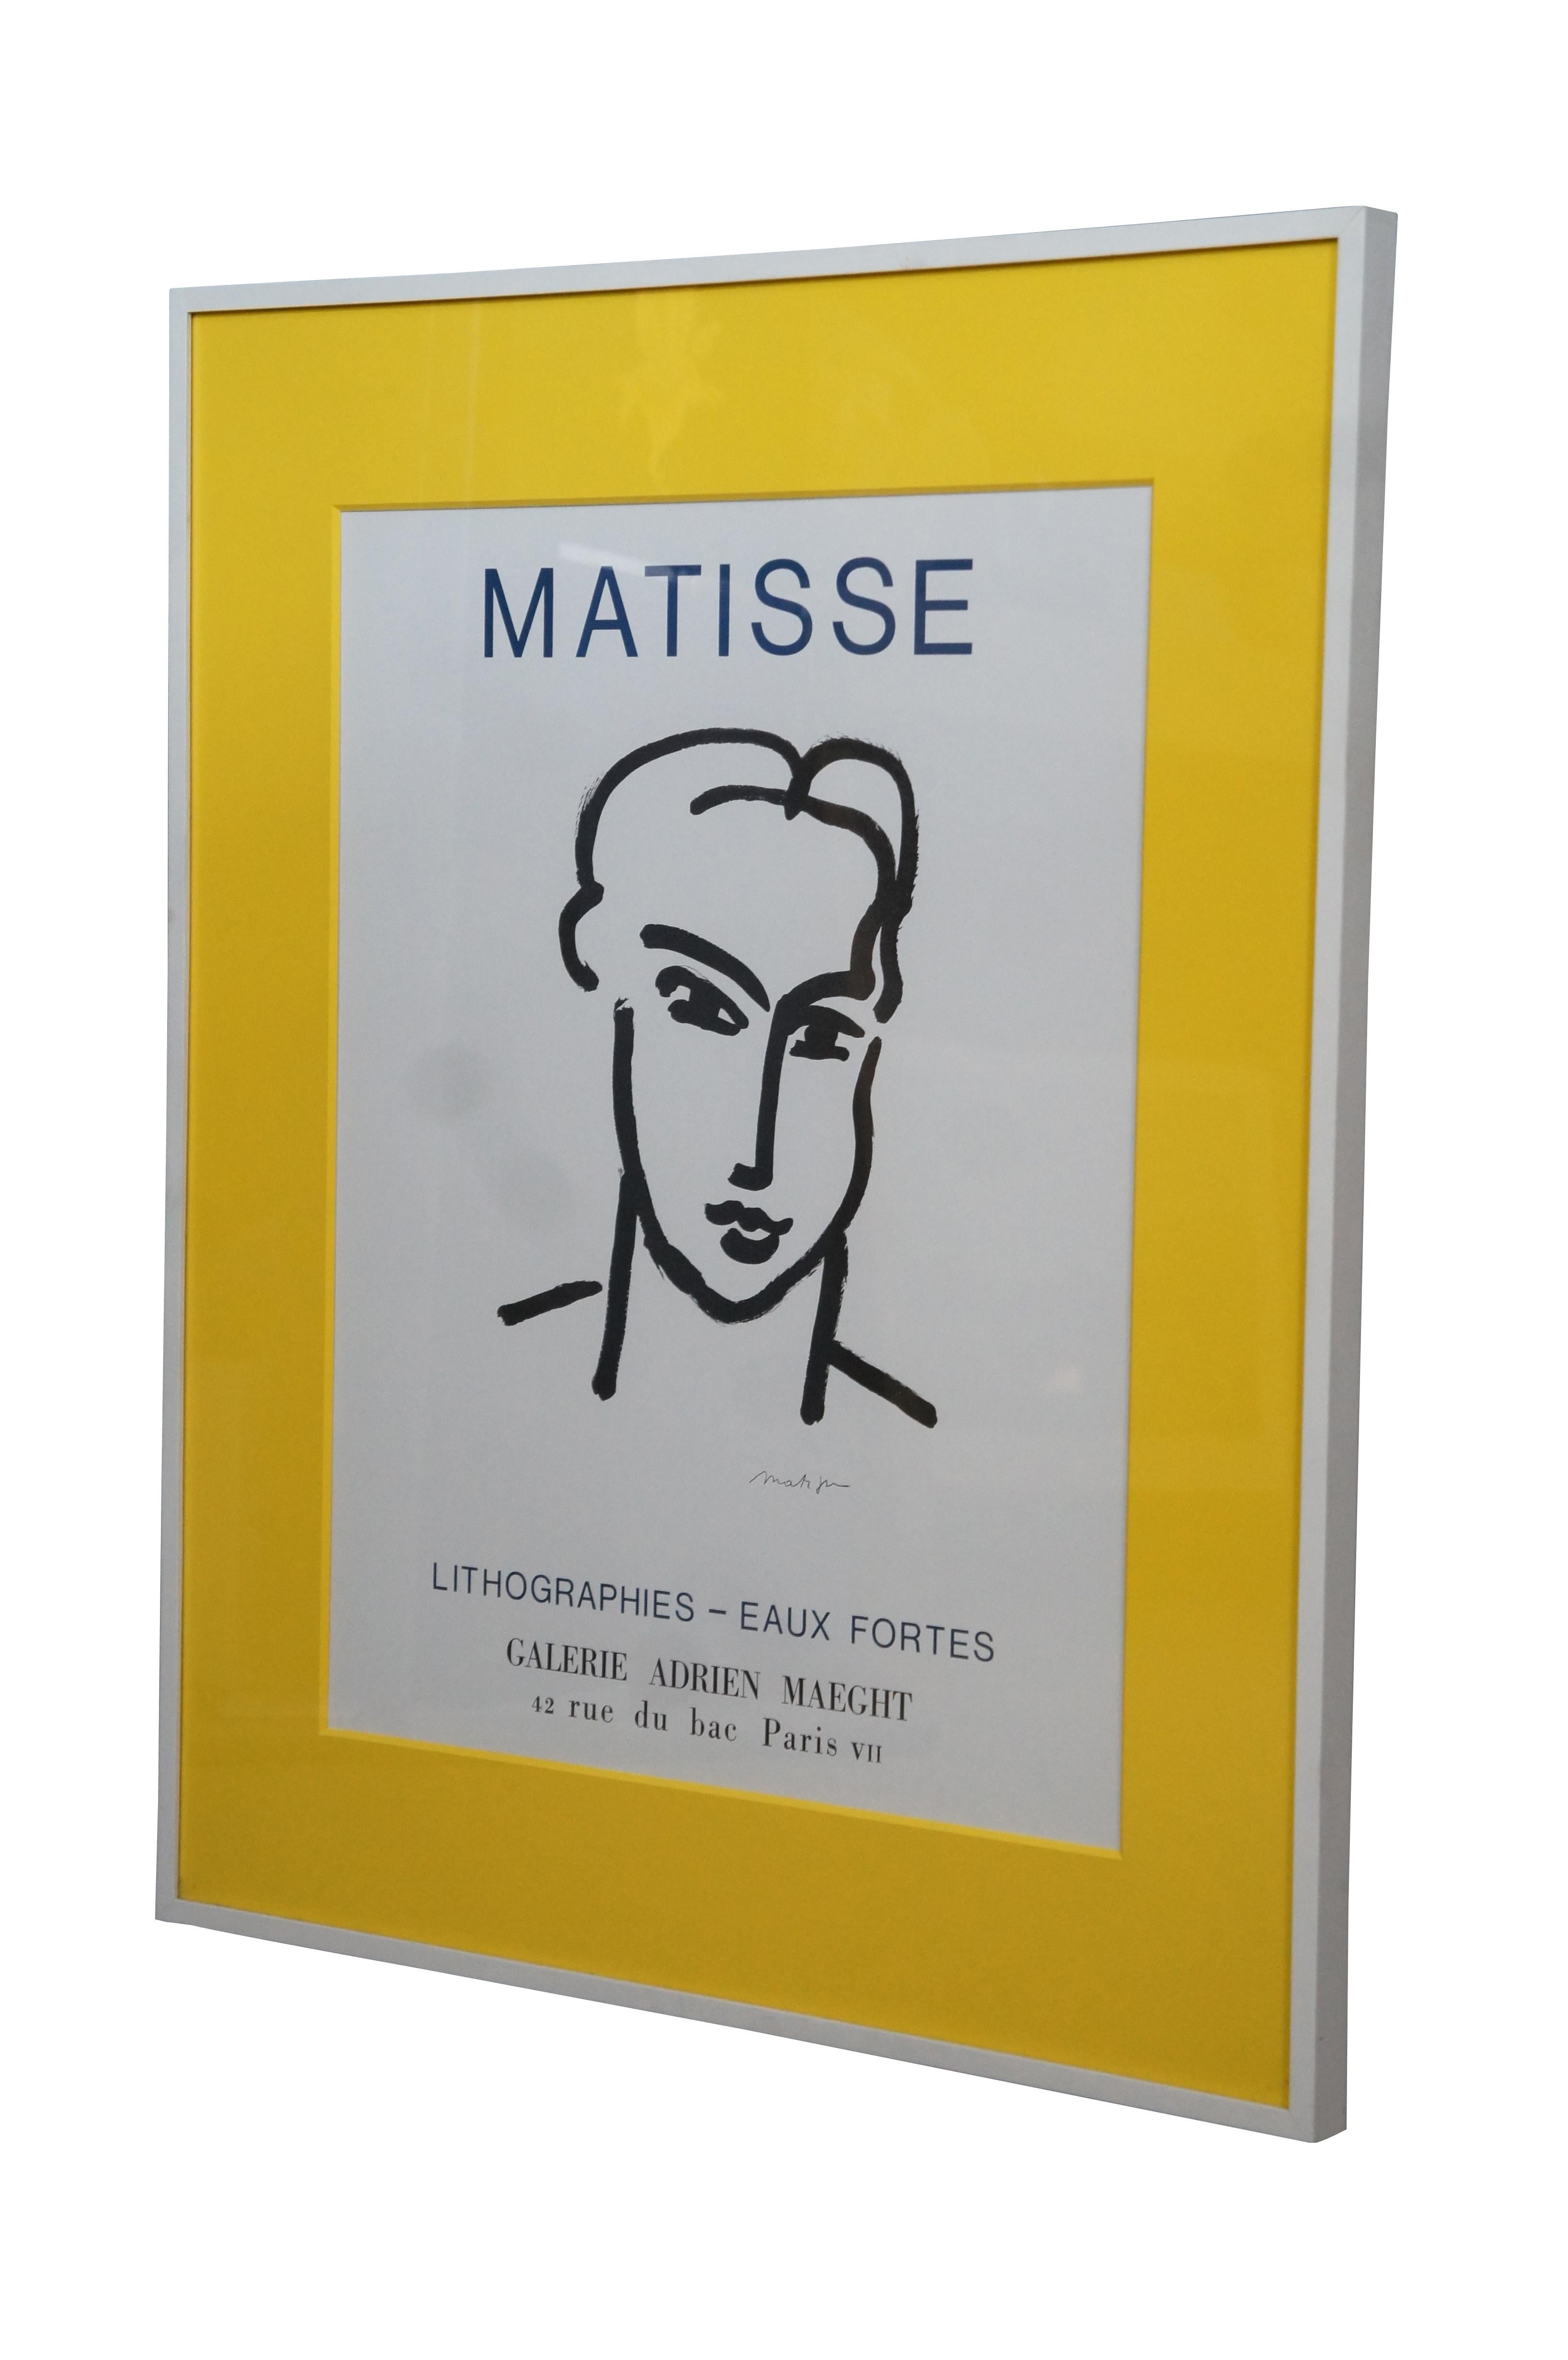 Framed poster print advertising the 1964 exhibition of Matisse – Lithographies – Eux Fortes at the Galerie Adrien Maeght, featuring Grande Tete de Katia. Framed in white with bright yellow mat.

“The Galerie Maeght is a gallery of modern art in